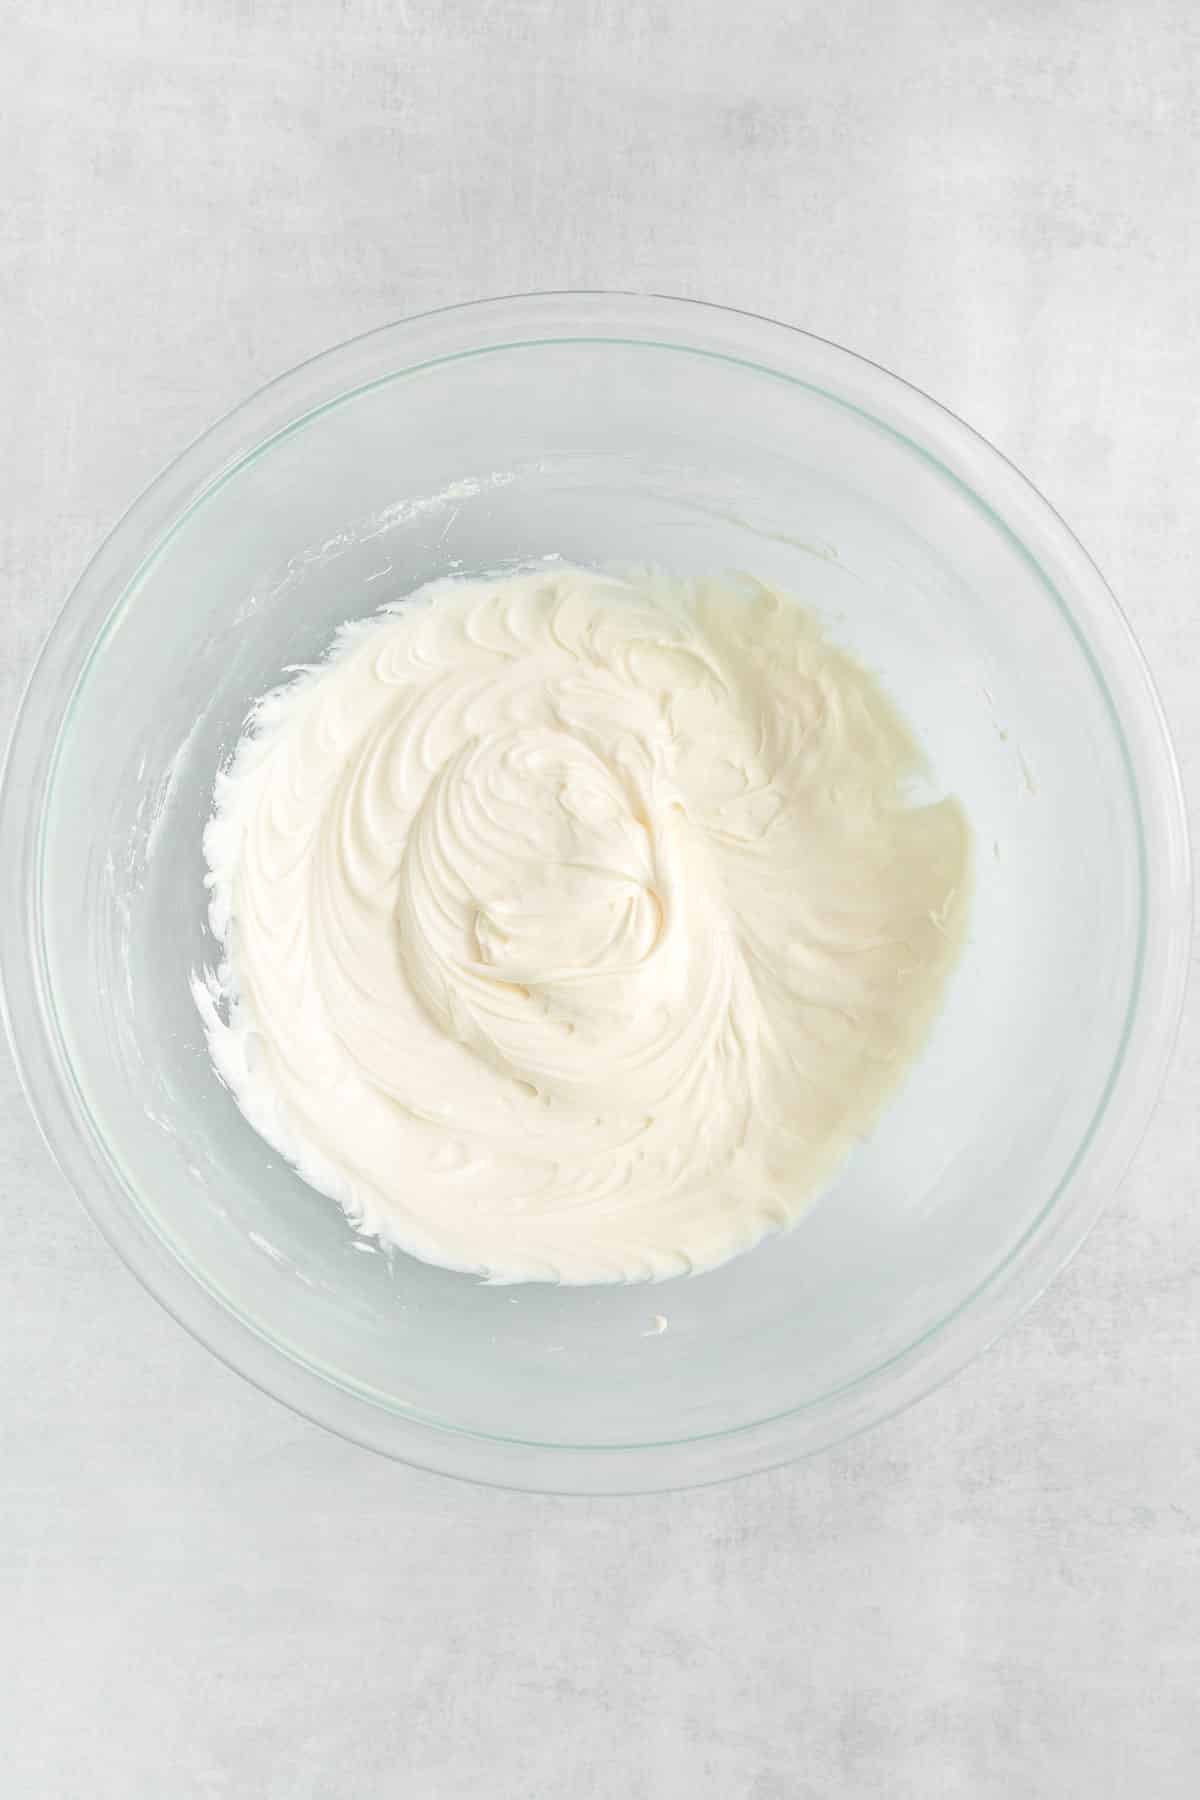 big glass mixing bowl with cream cheese blended.